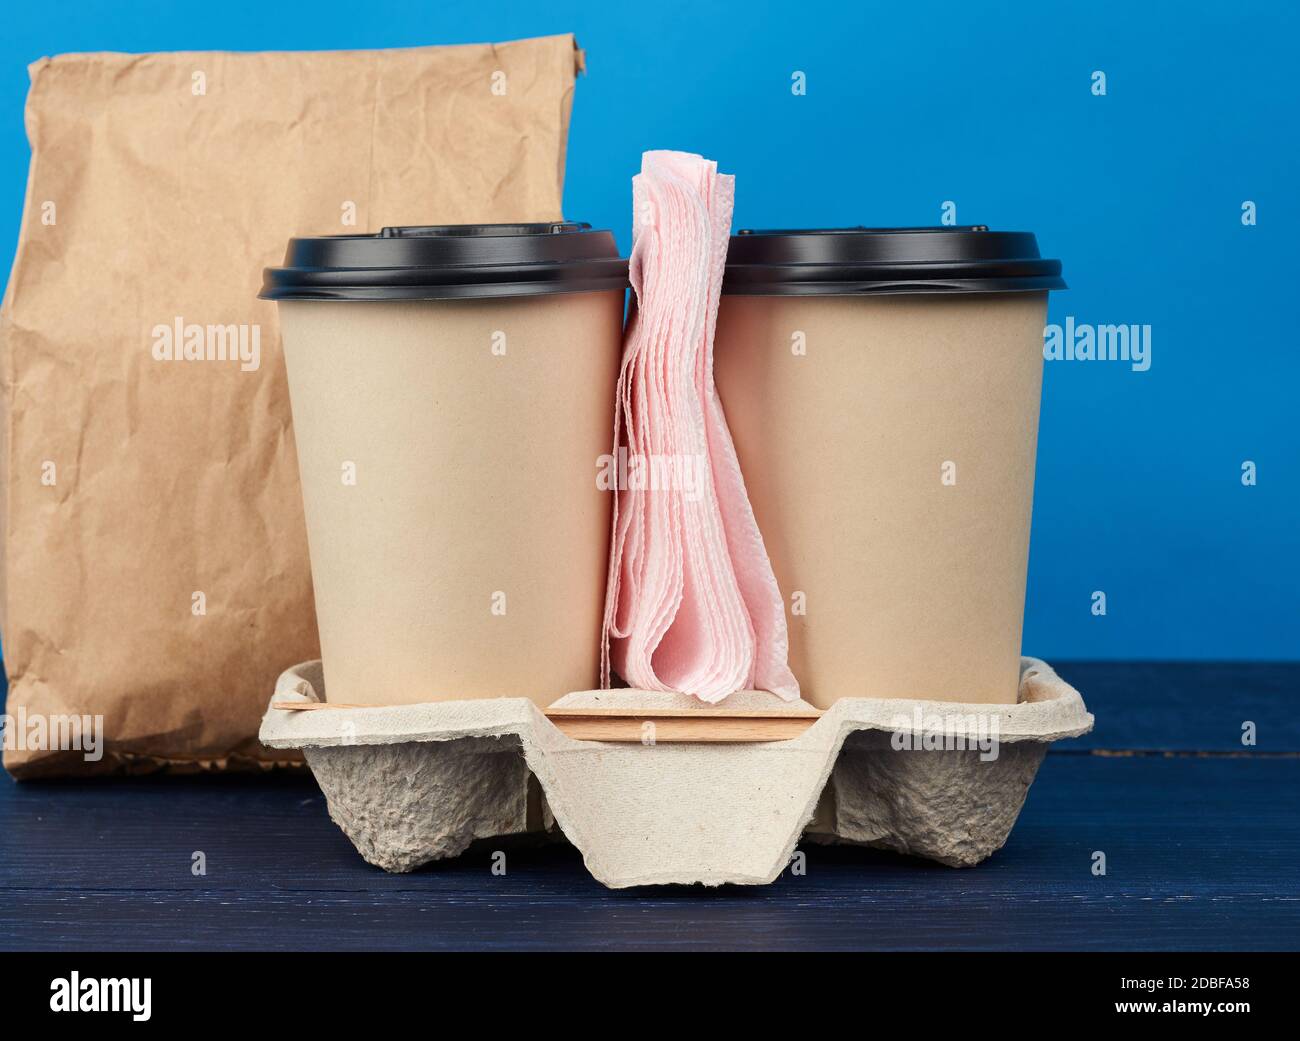 https://c8.alamy.com/comp/2DBFA58/brown-paper-disposable-cups-with-a-plastic-lid-stand-in-the-tray-on-a-blue-wooden-table-takeaway-containers-2DBFA58.jpg